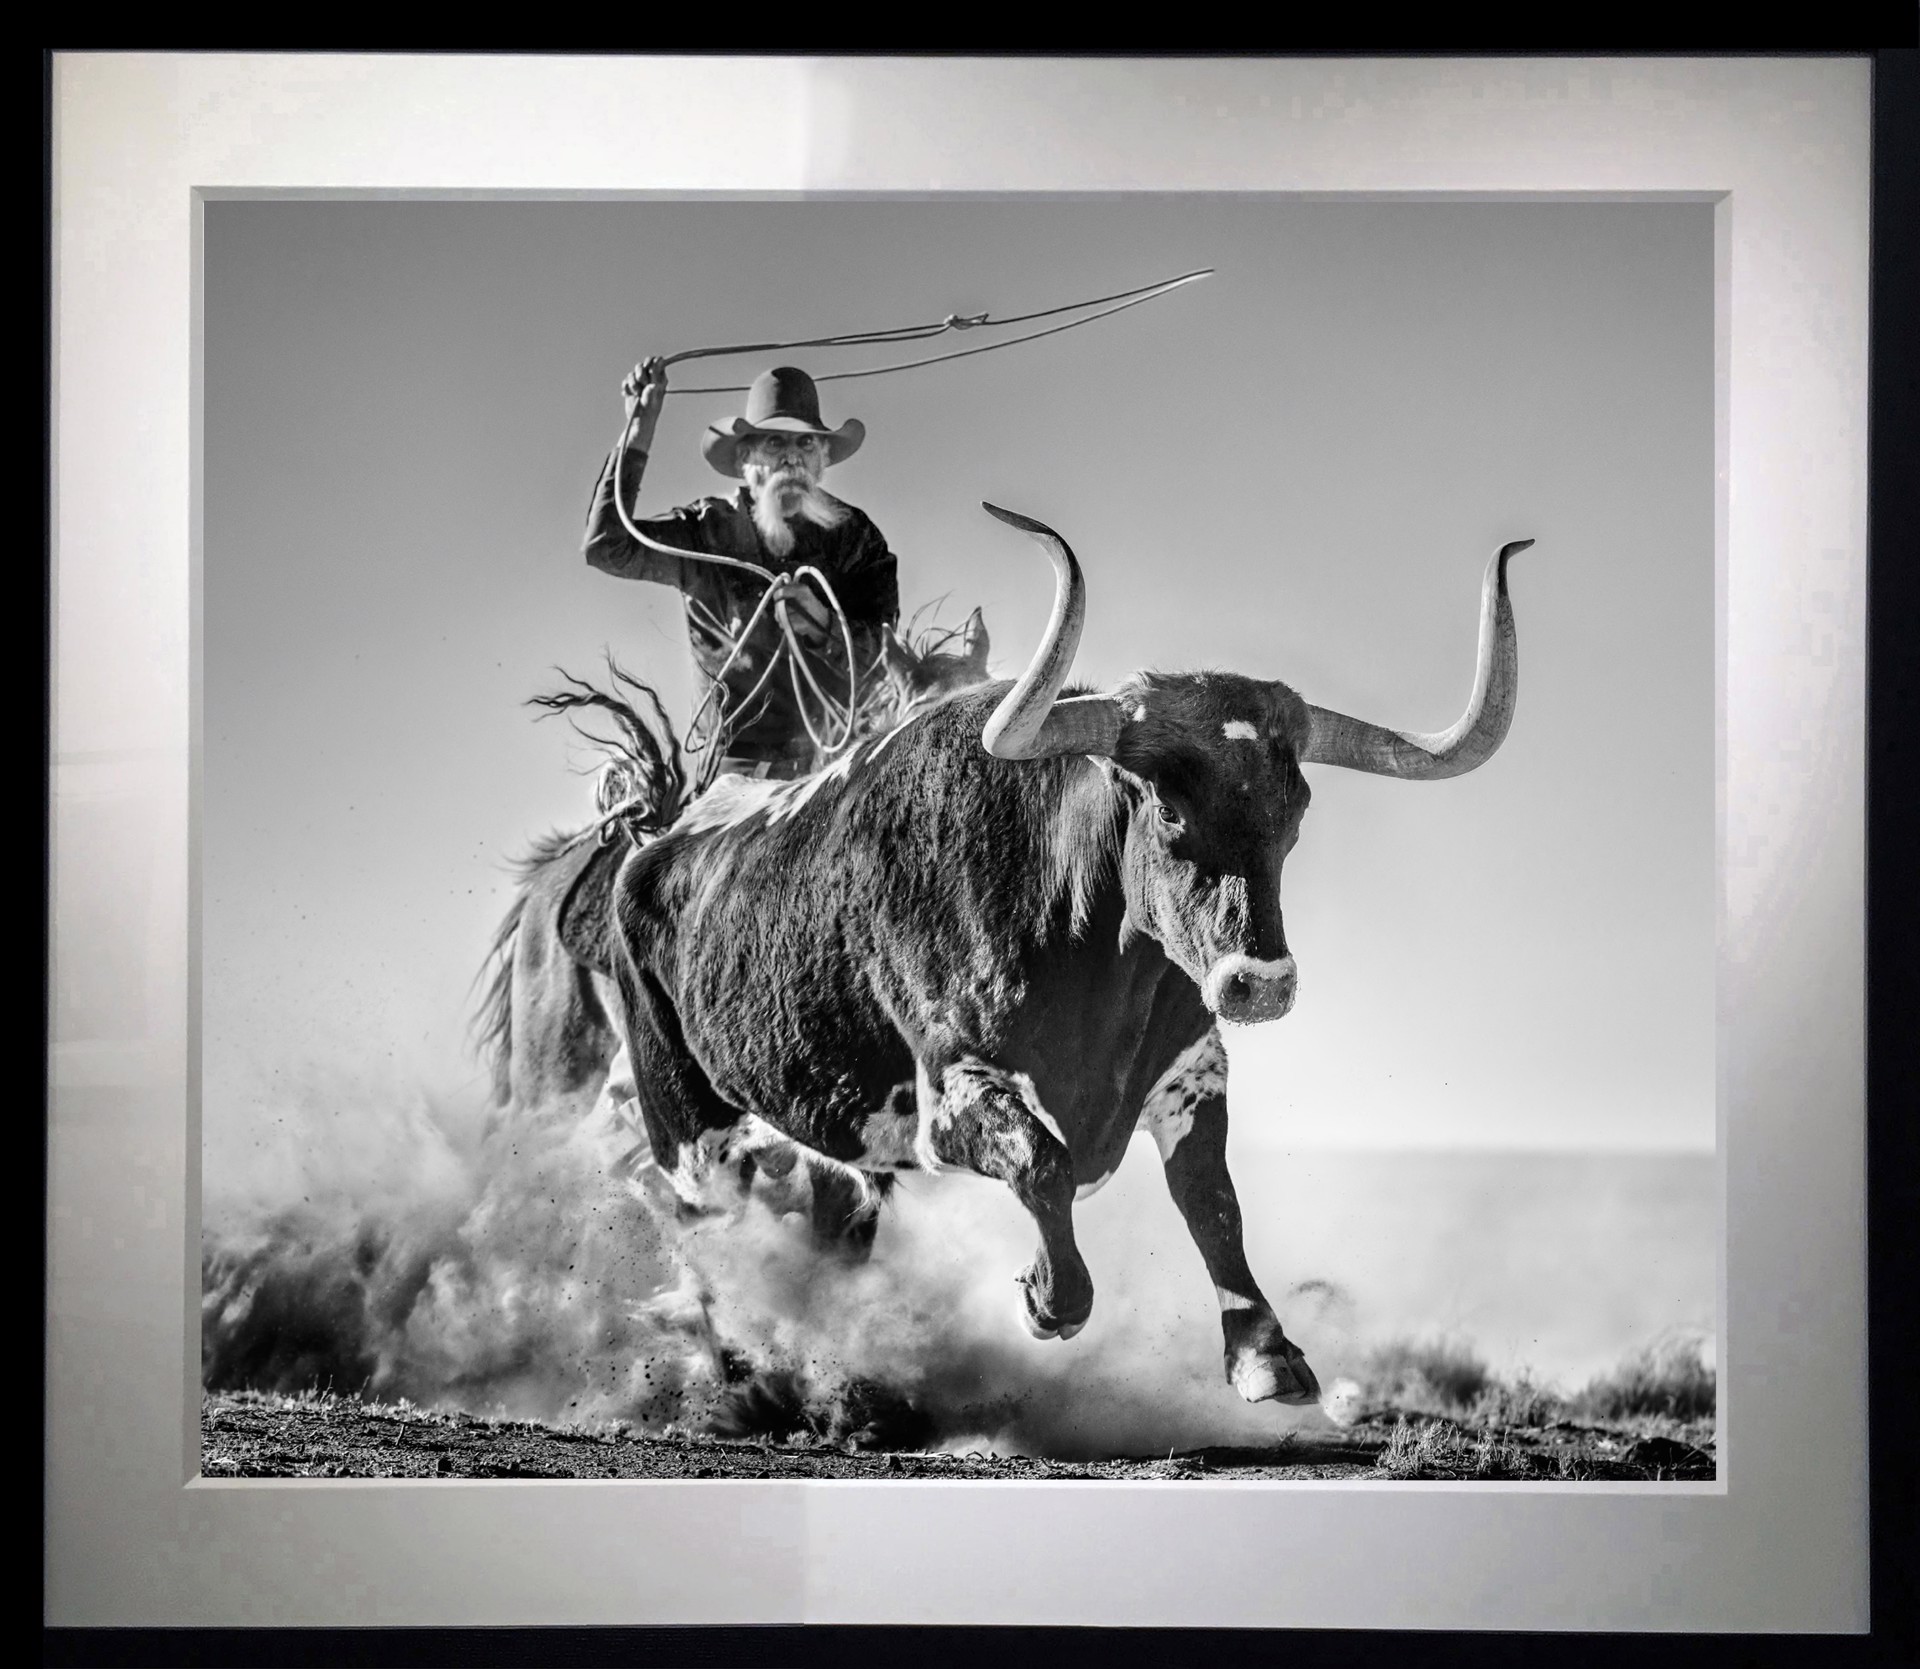 Ain't my First Rodeo by David Yarrow